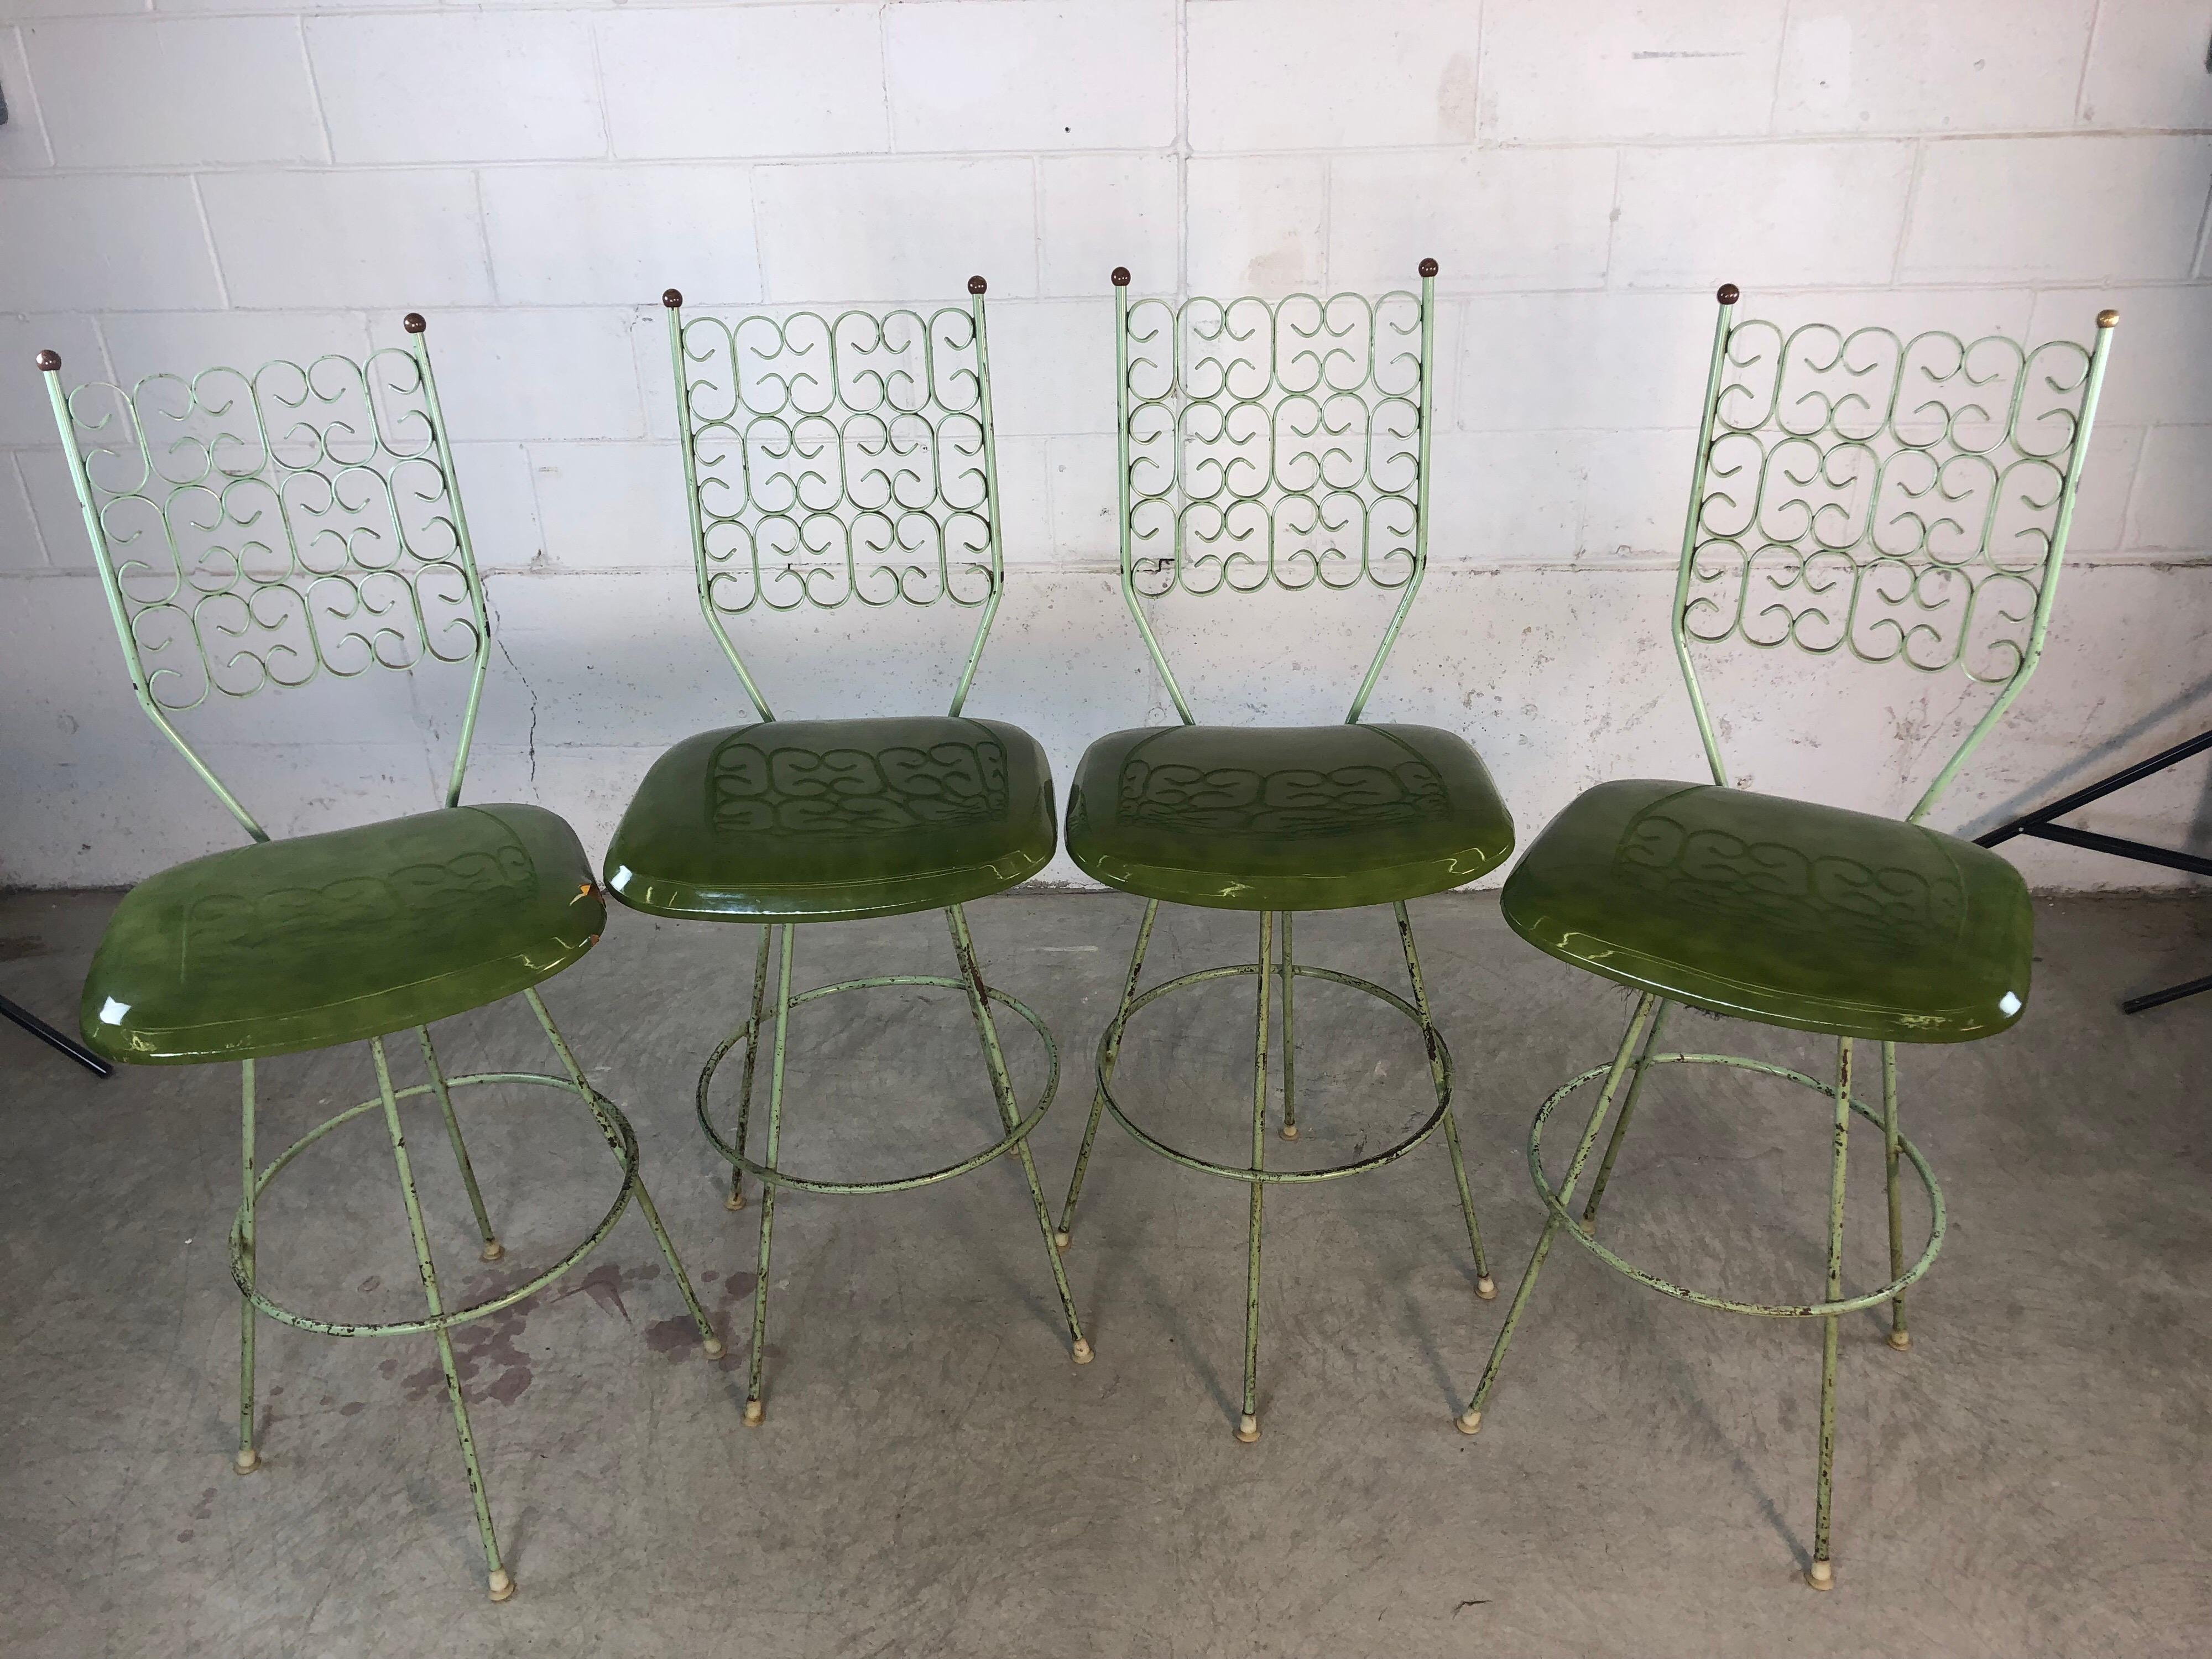 Vintage Mid-Century Modern set of four bar stools designed by Arthur Umanoff for the Boyeur Scott Furniture Co., Granada collection. The stools are in the original condition and have not been restored. They retain some of the original green paint.